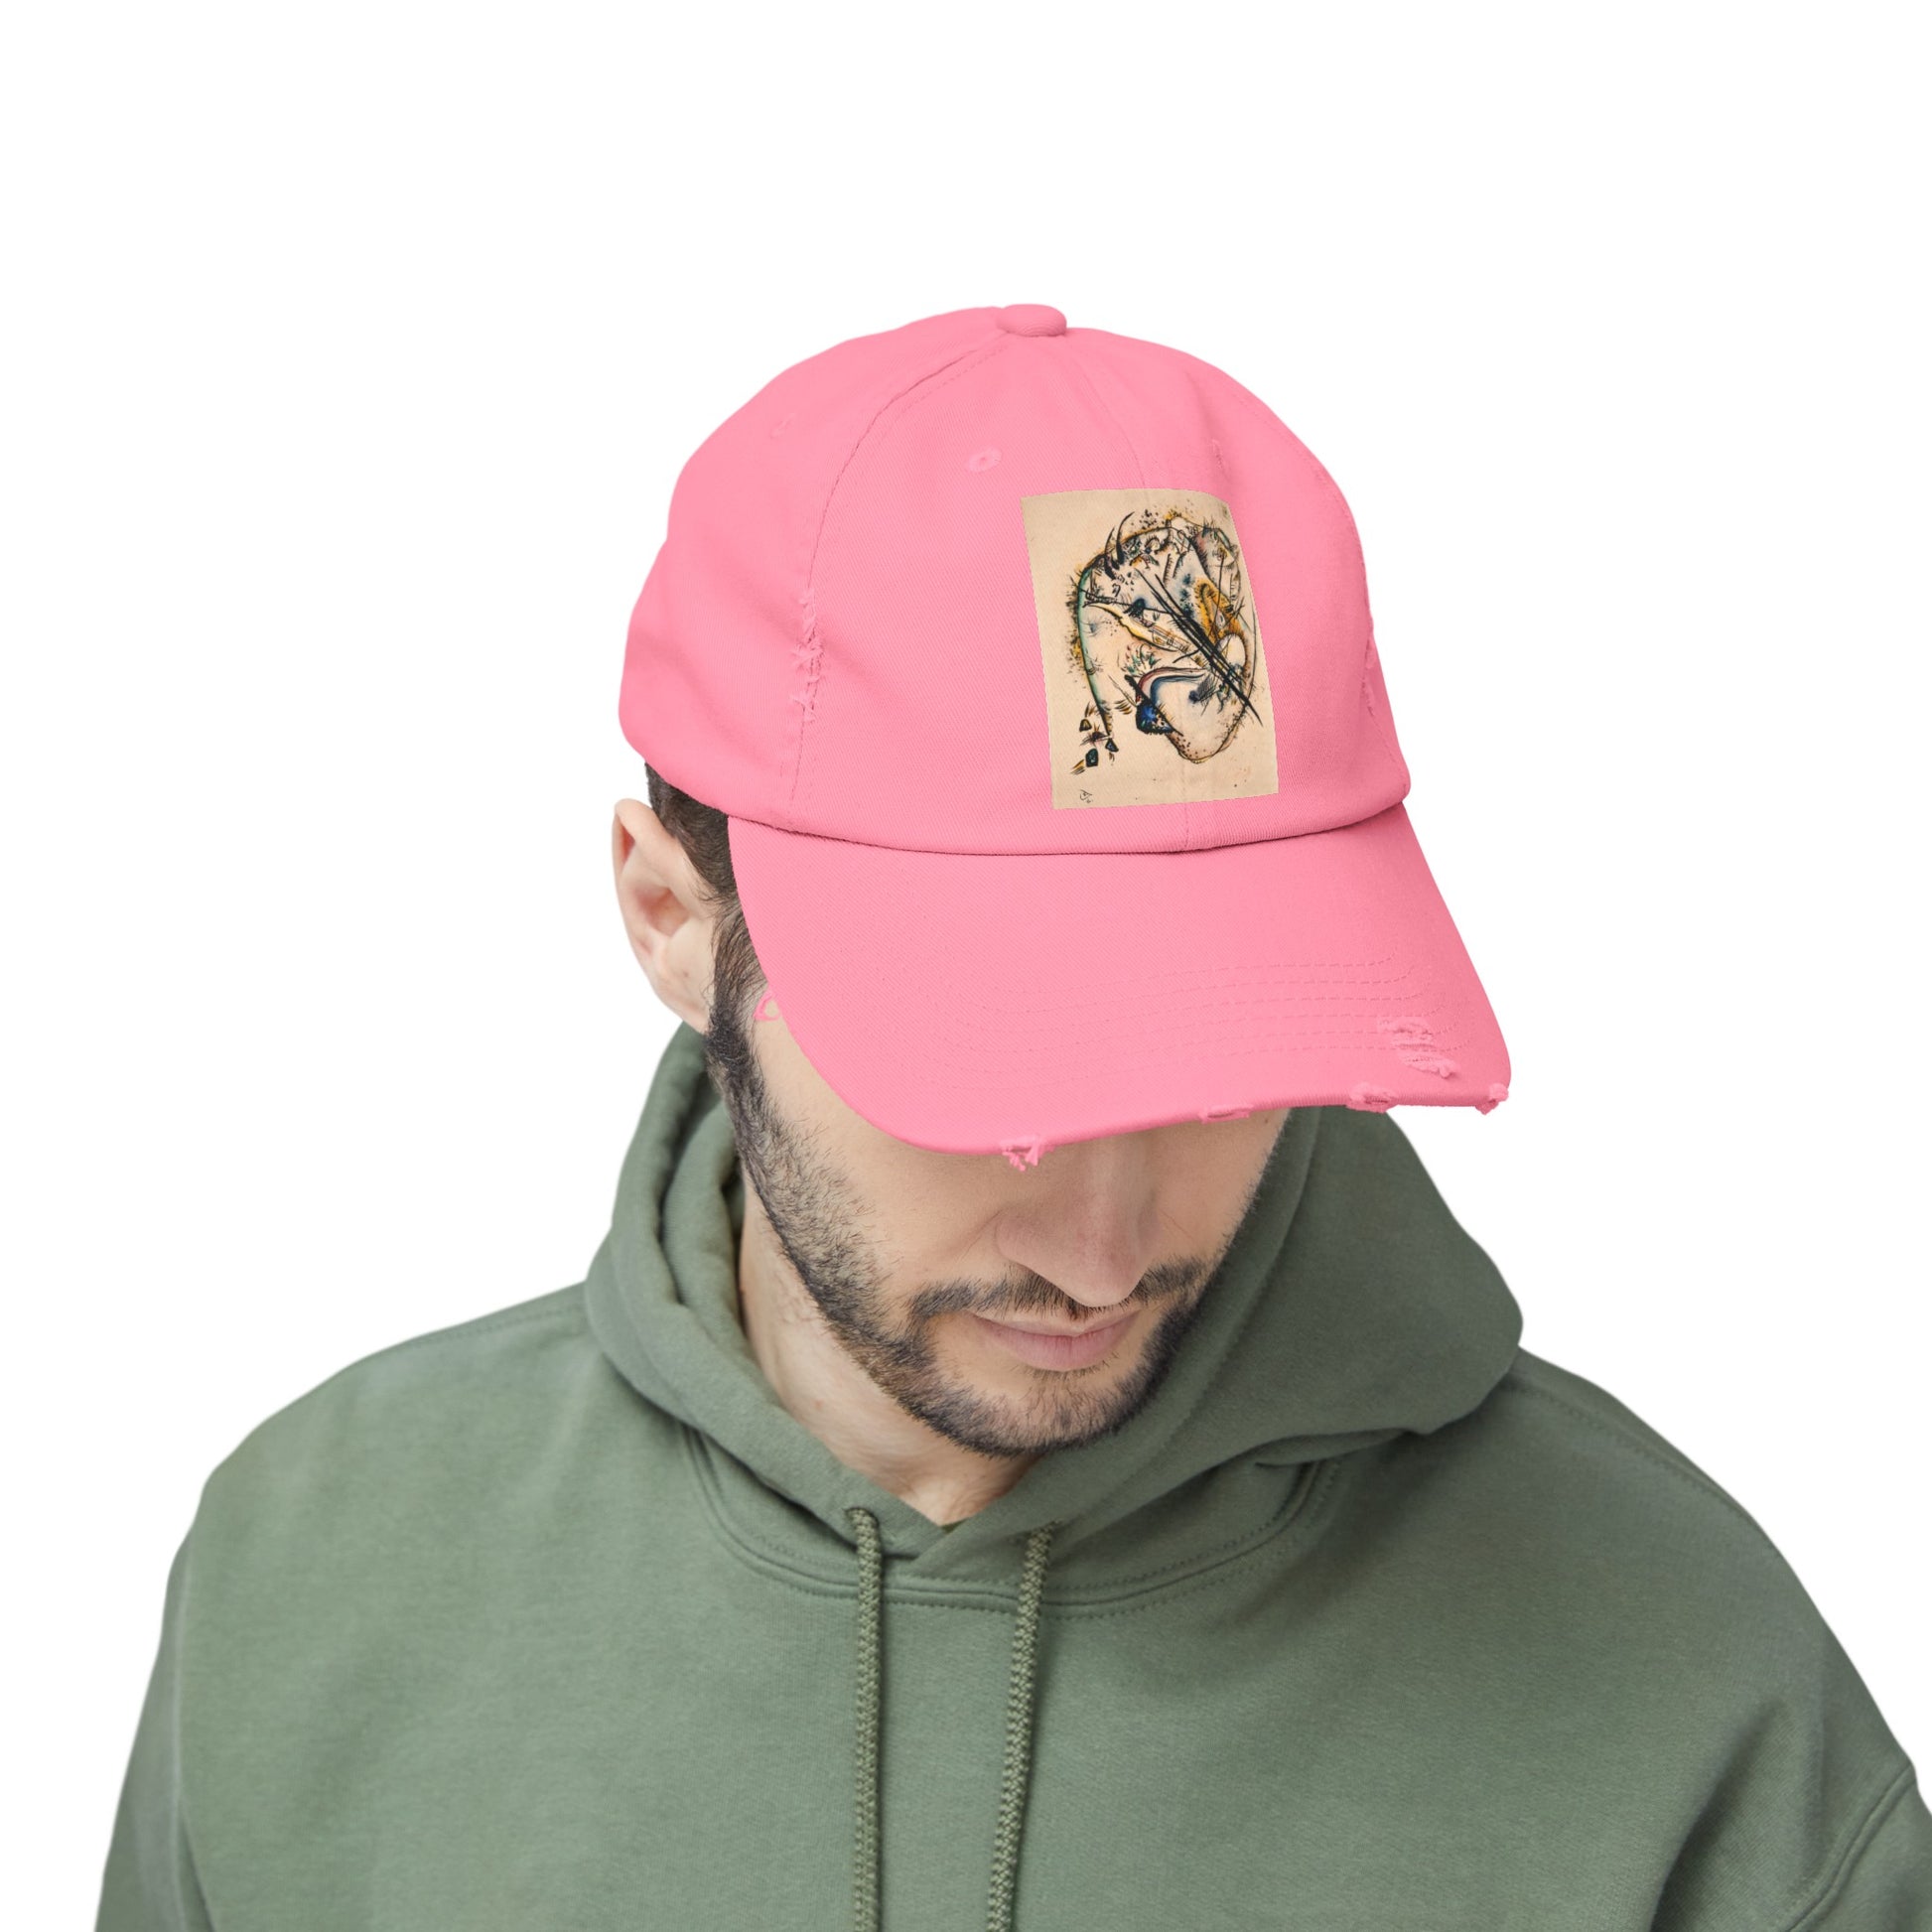 a man wearing a pink hat with a tiger on it